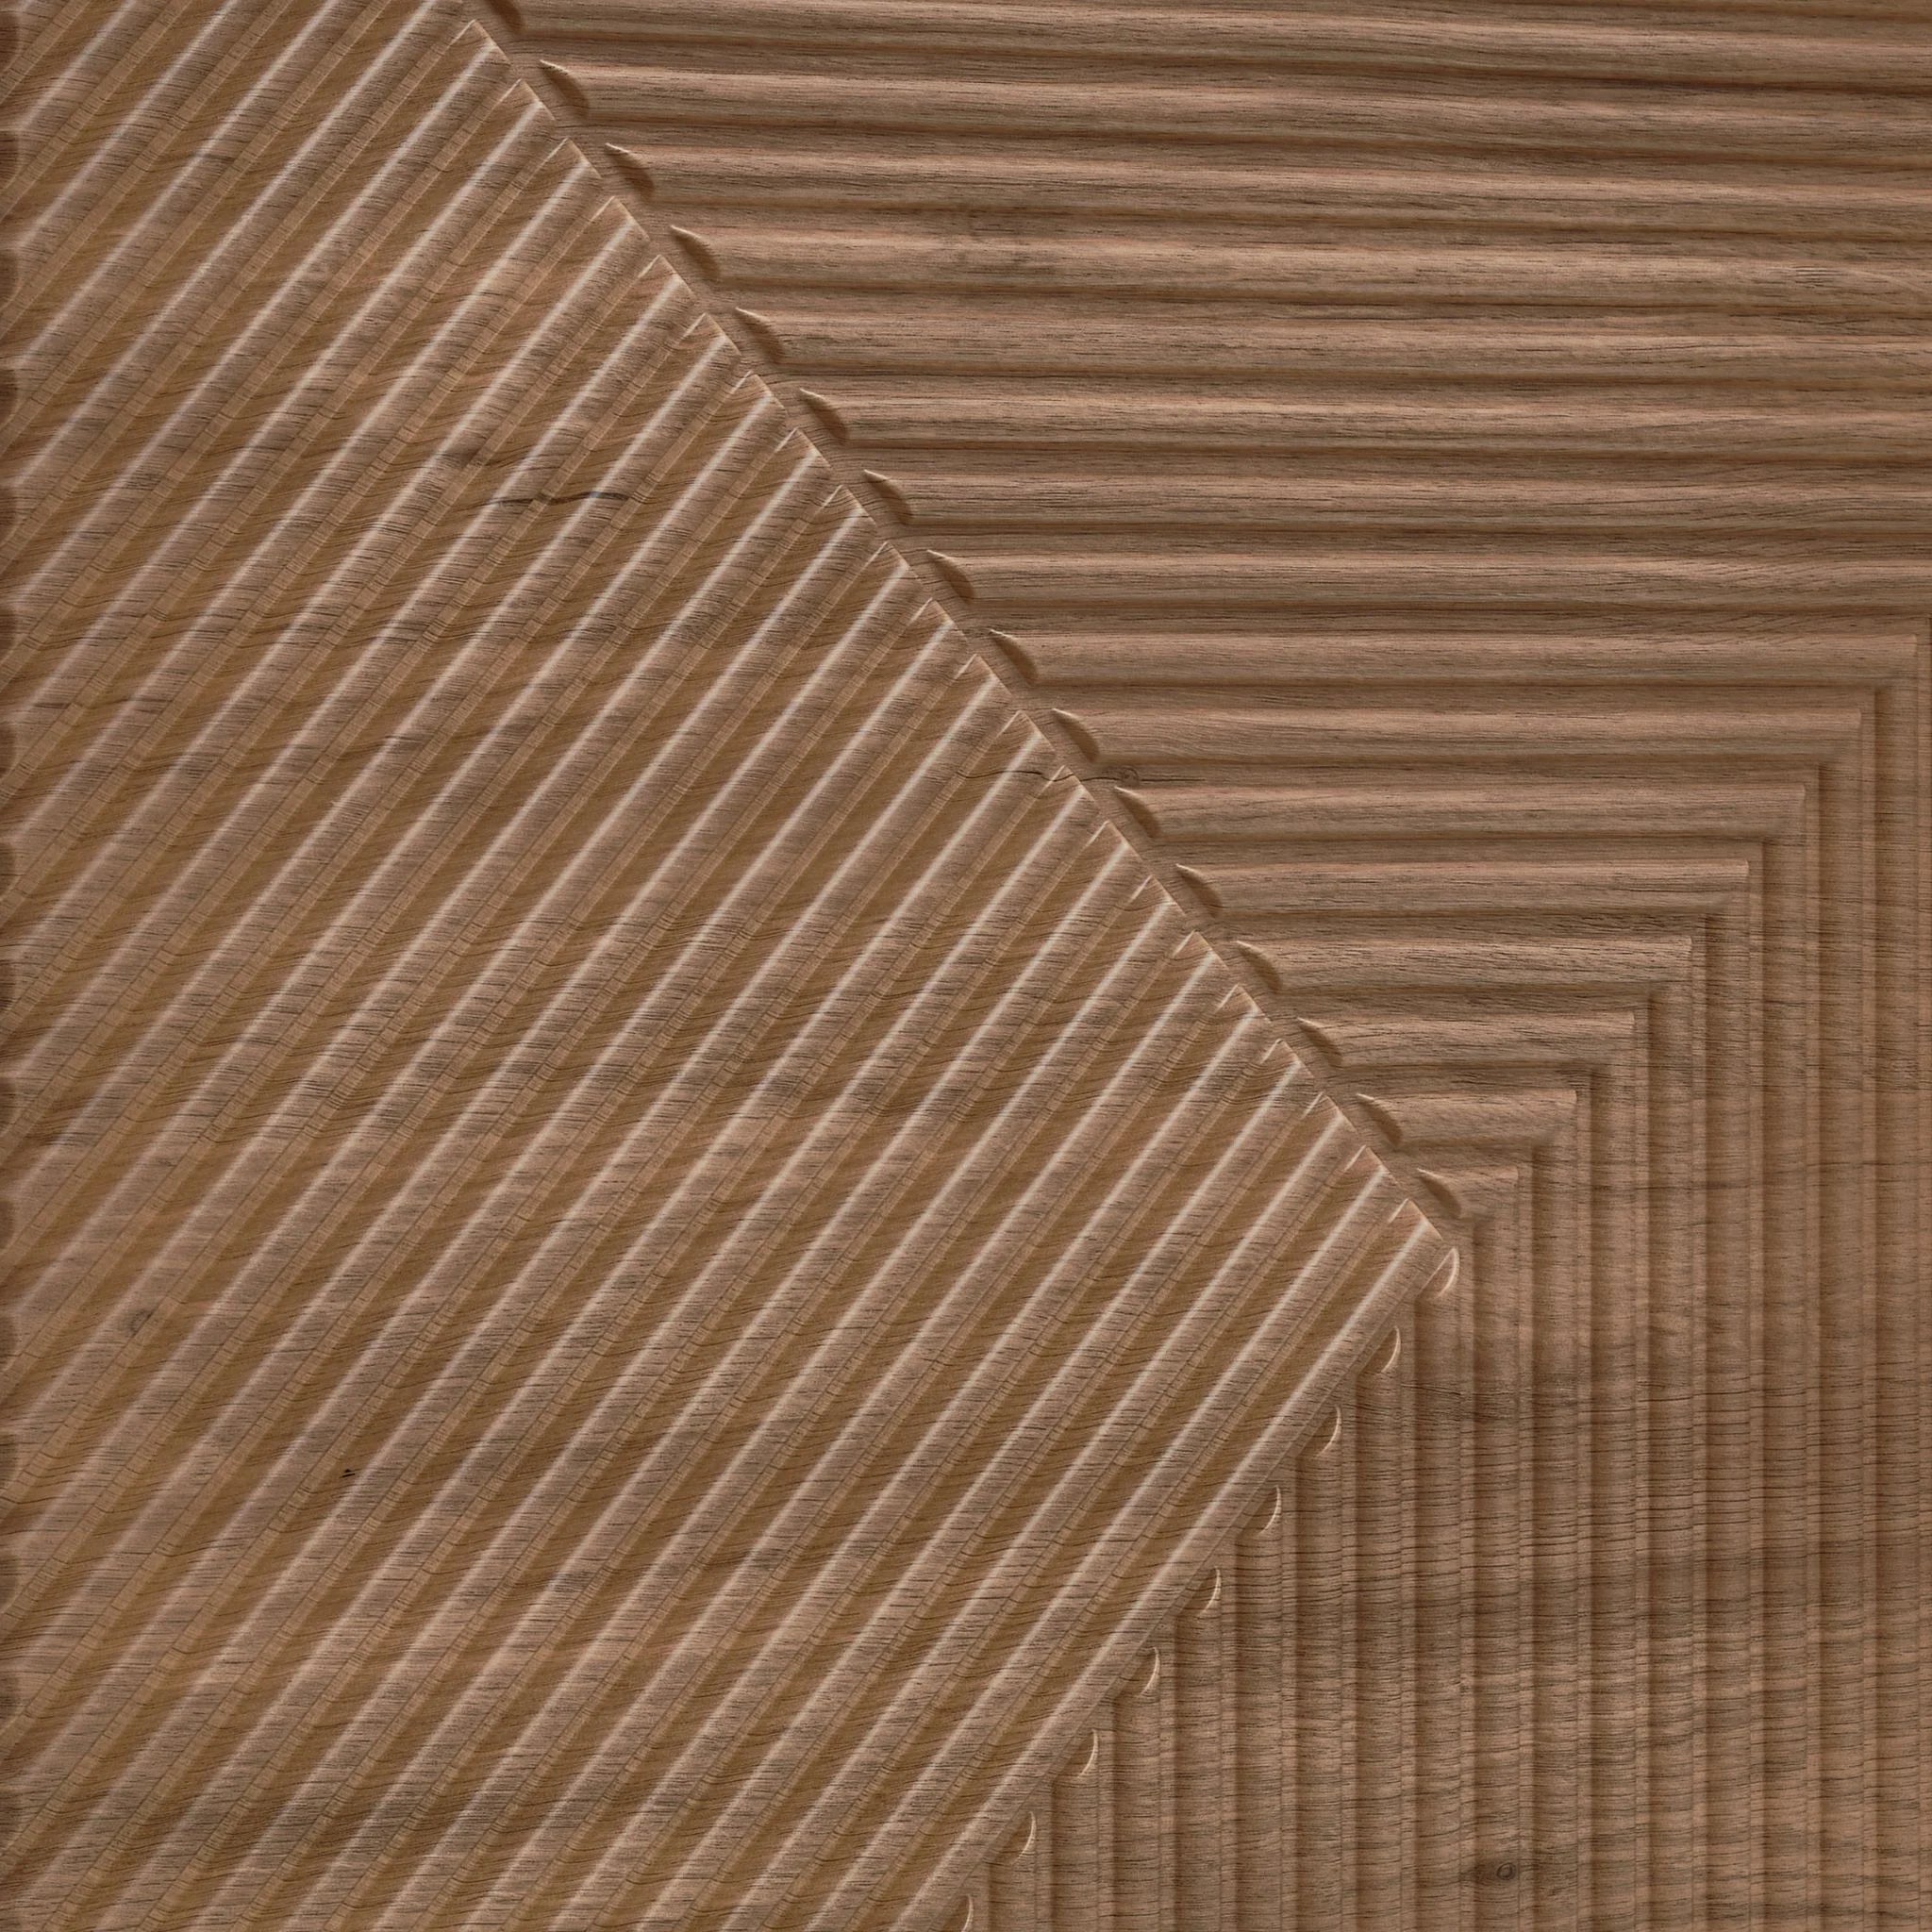 Close-up of wooden PVC wall panel with geometric design